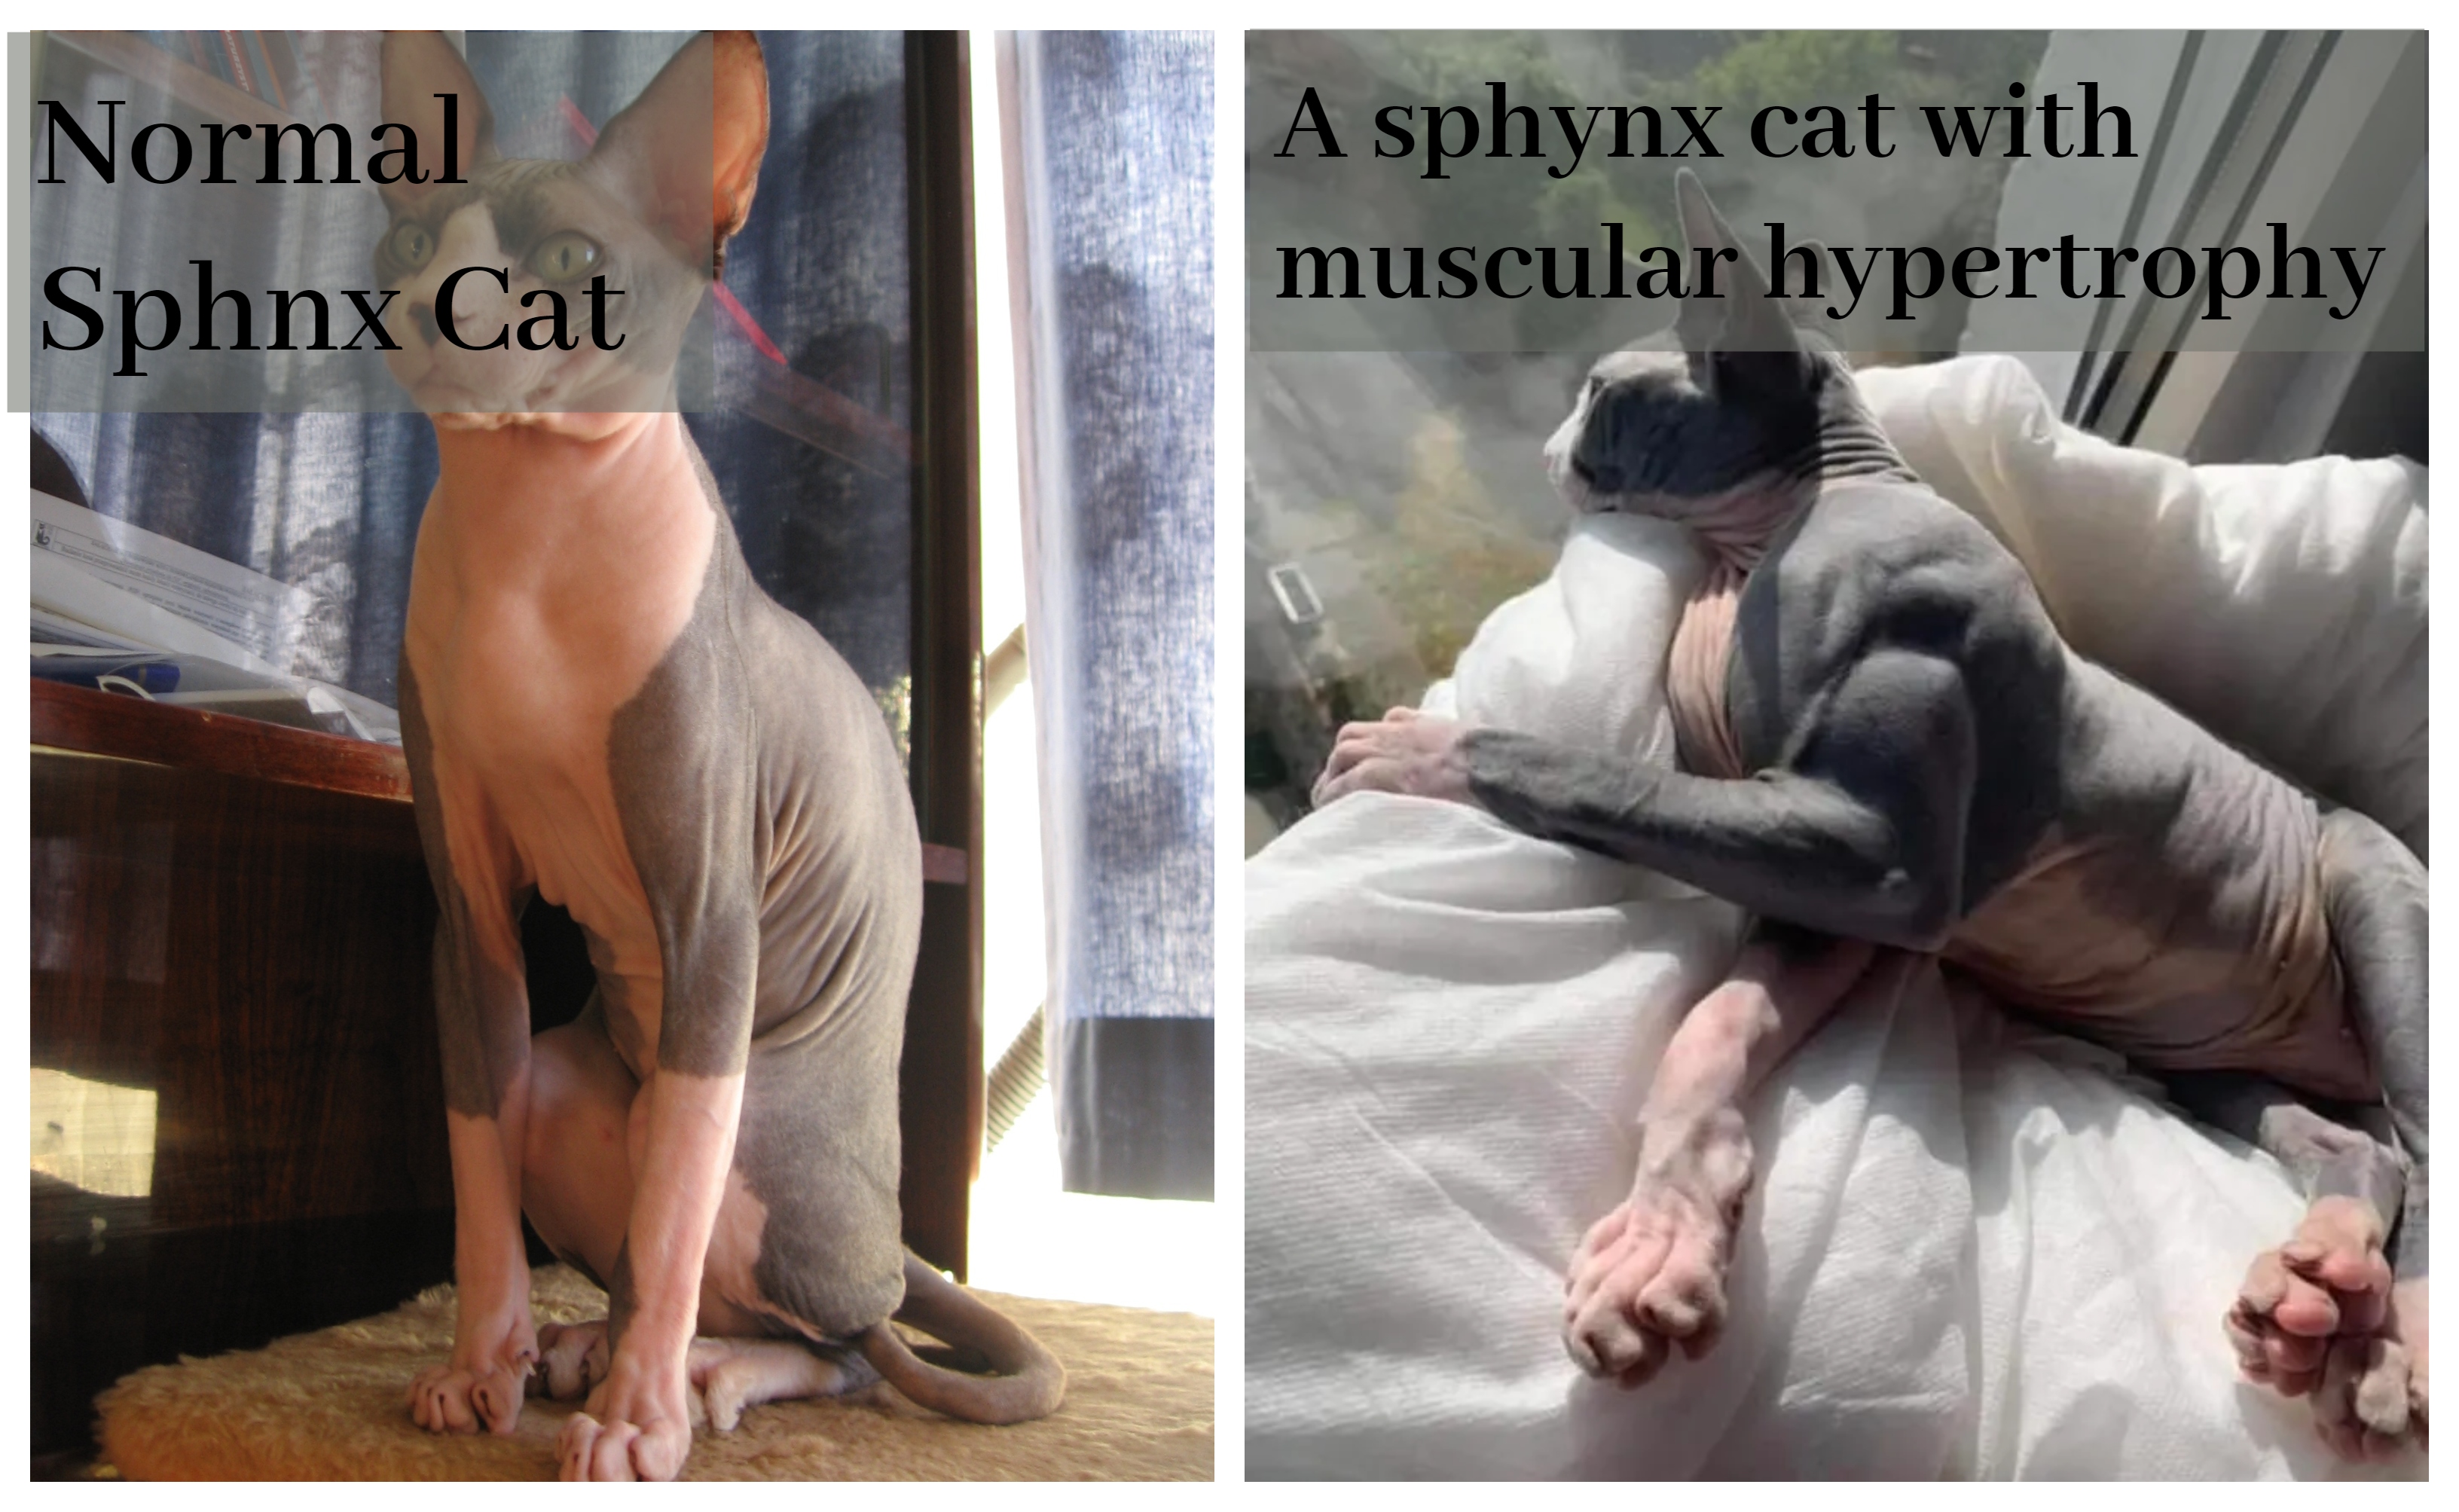 Normal Sphynx cat Vs a Sphynx cat suffering from a muscle disease